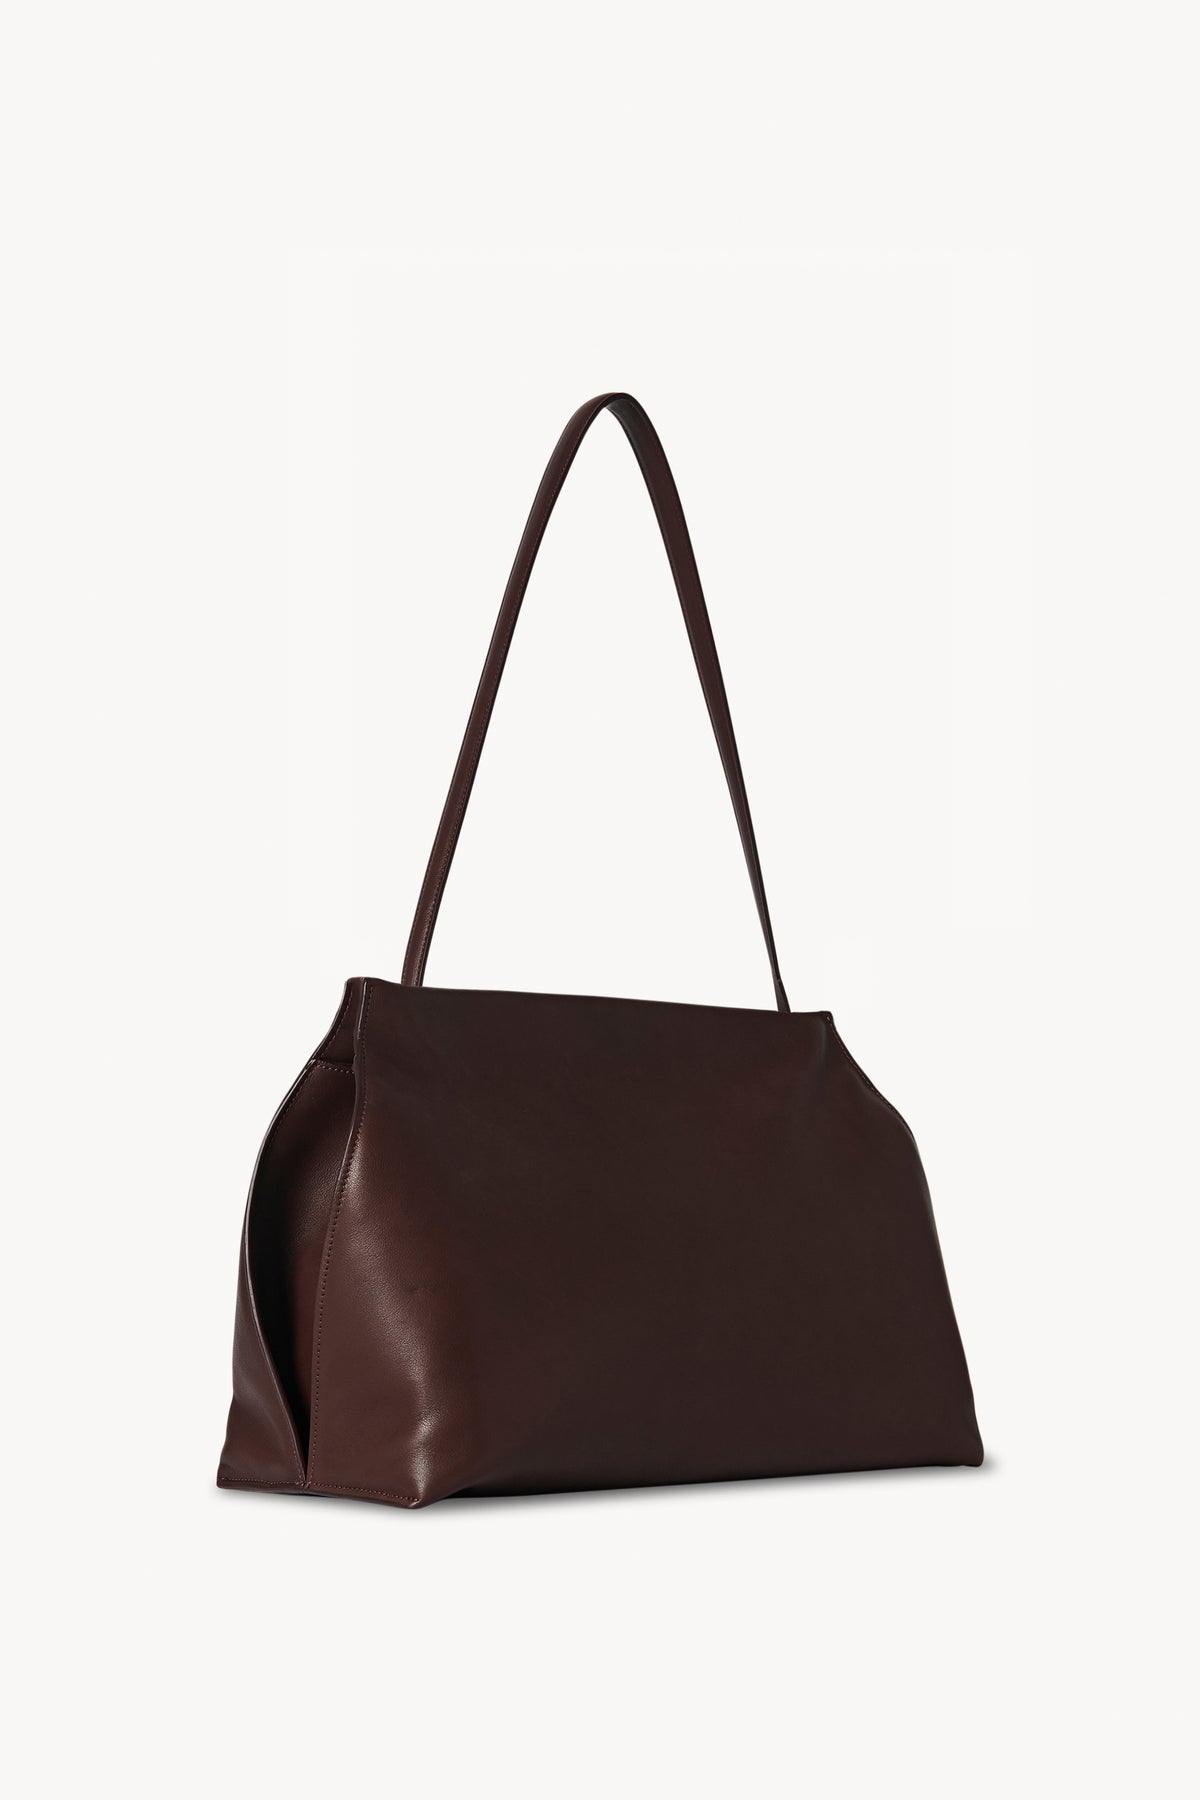 The Row Sienna Leather Shoulder Bag